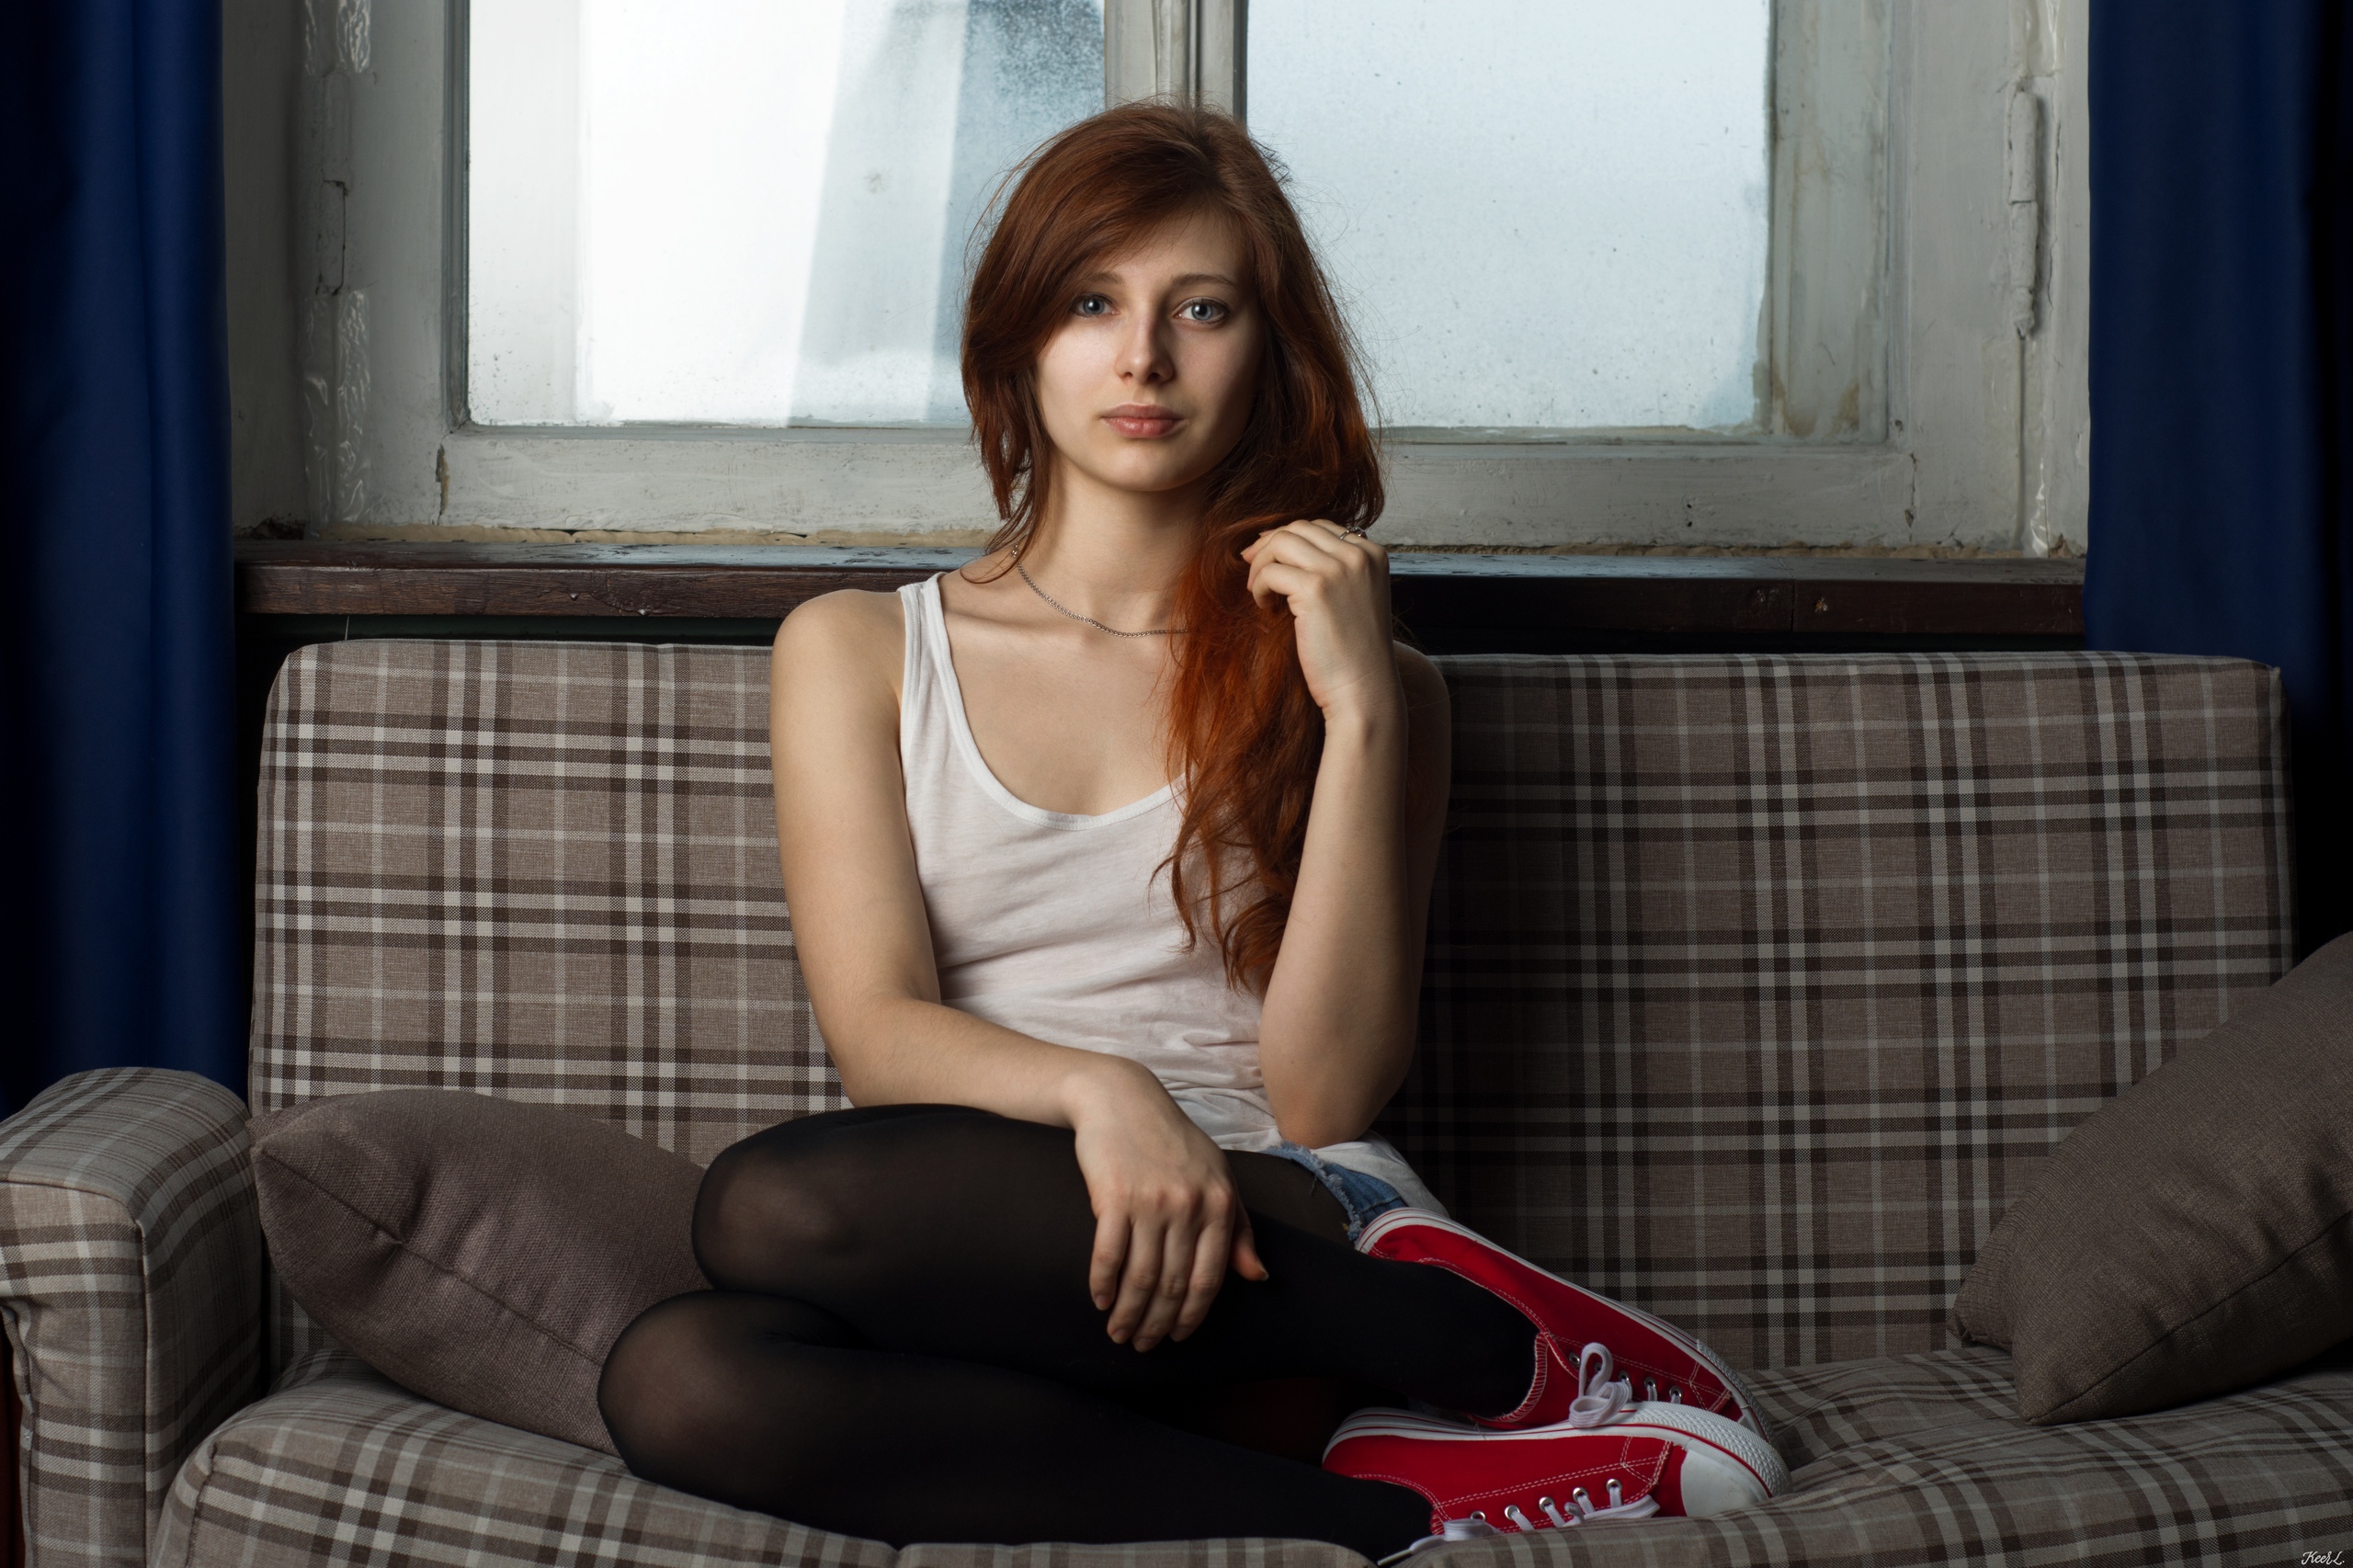 People 2560x1706 redhead long hair women model touching hair portrait frontal view white tops tank top jean shorts pantyhose Converse sitting necklace couch window indoors women indoors no bra Russian model collarbone